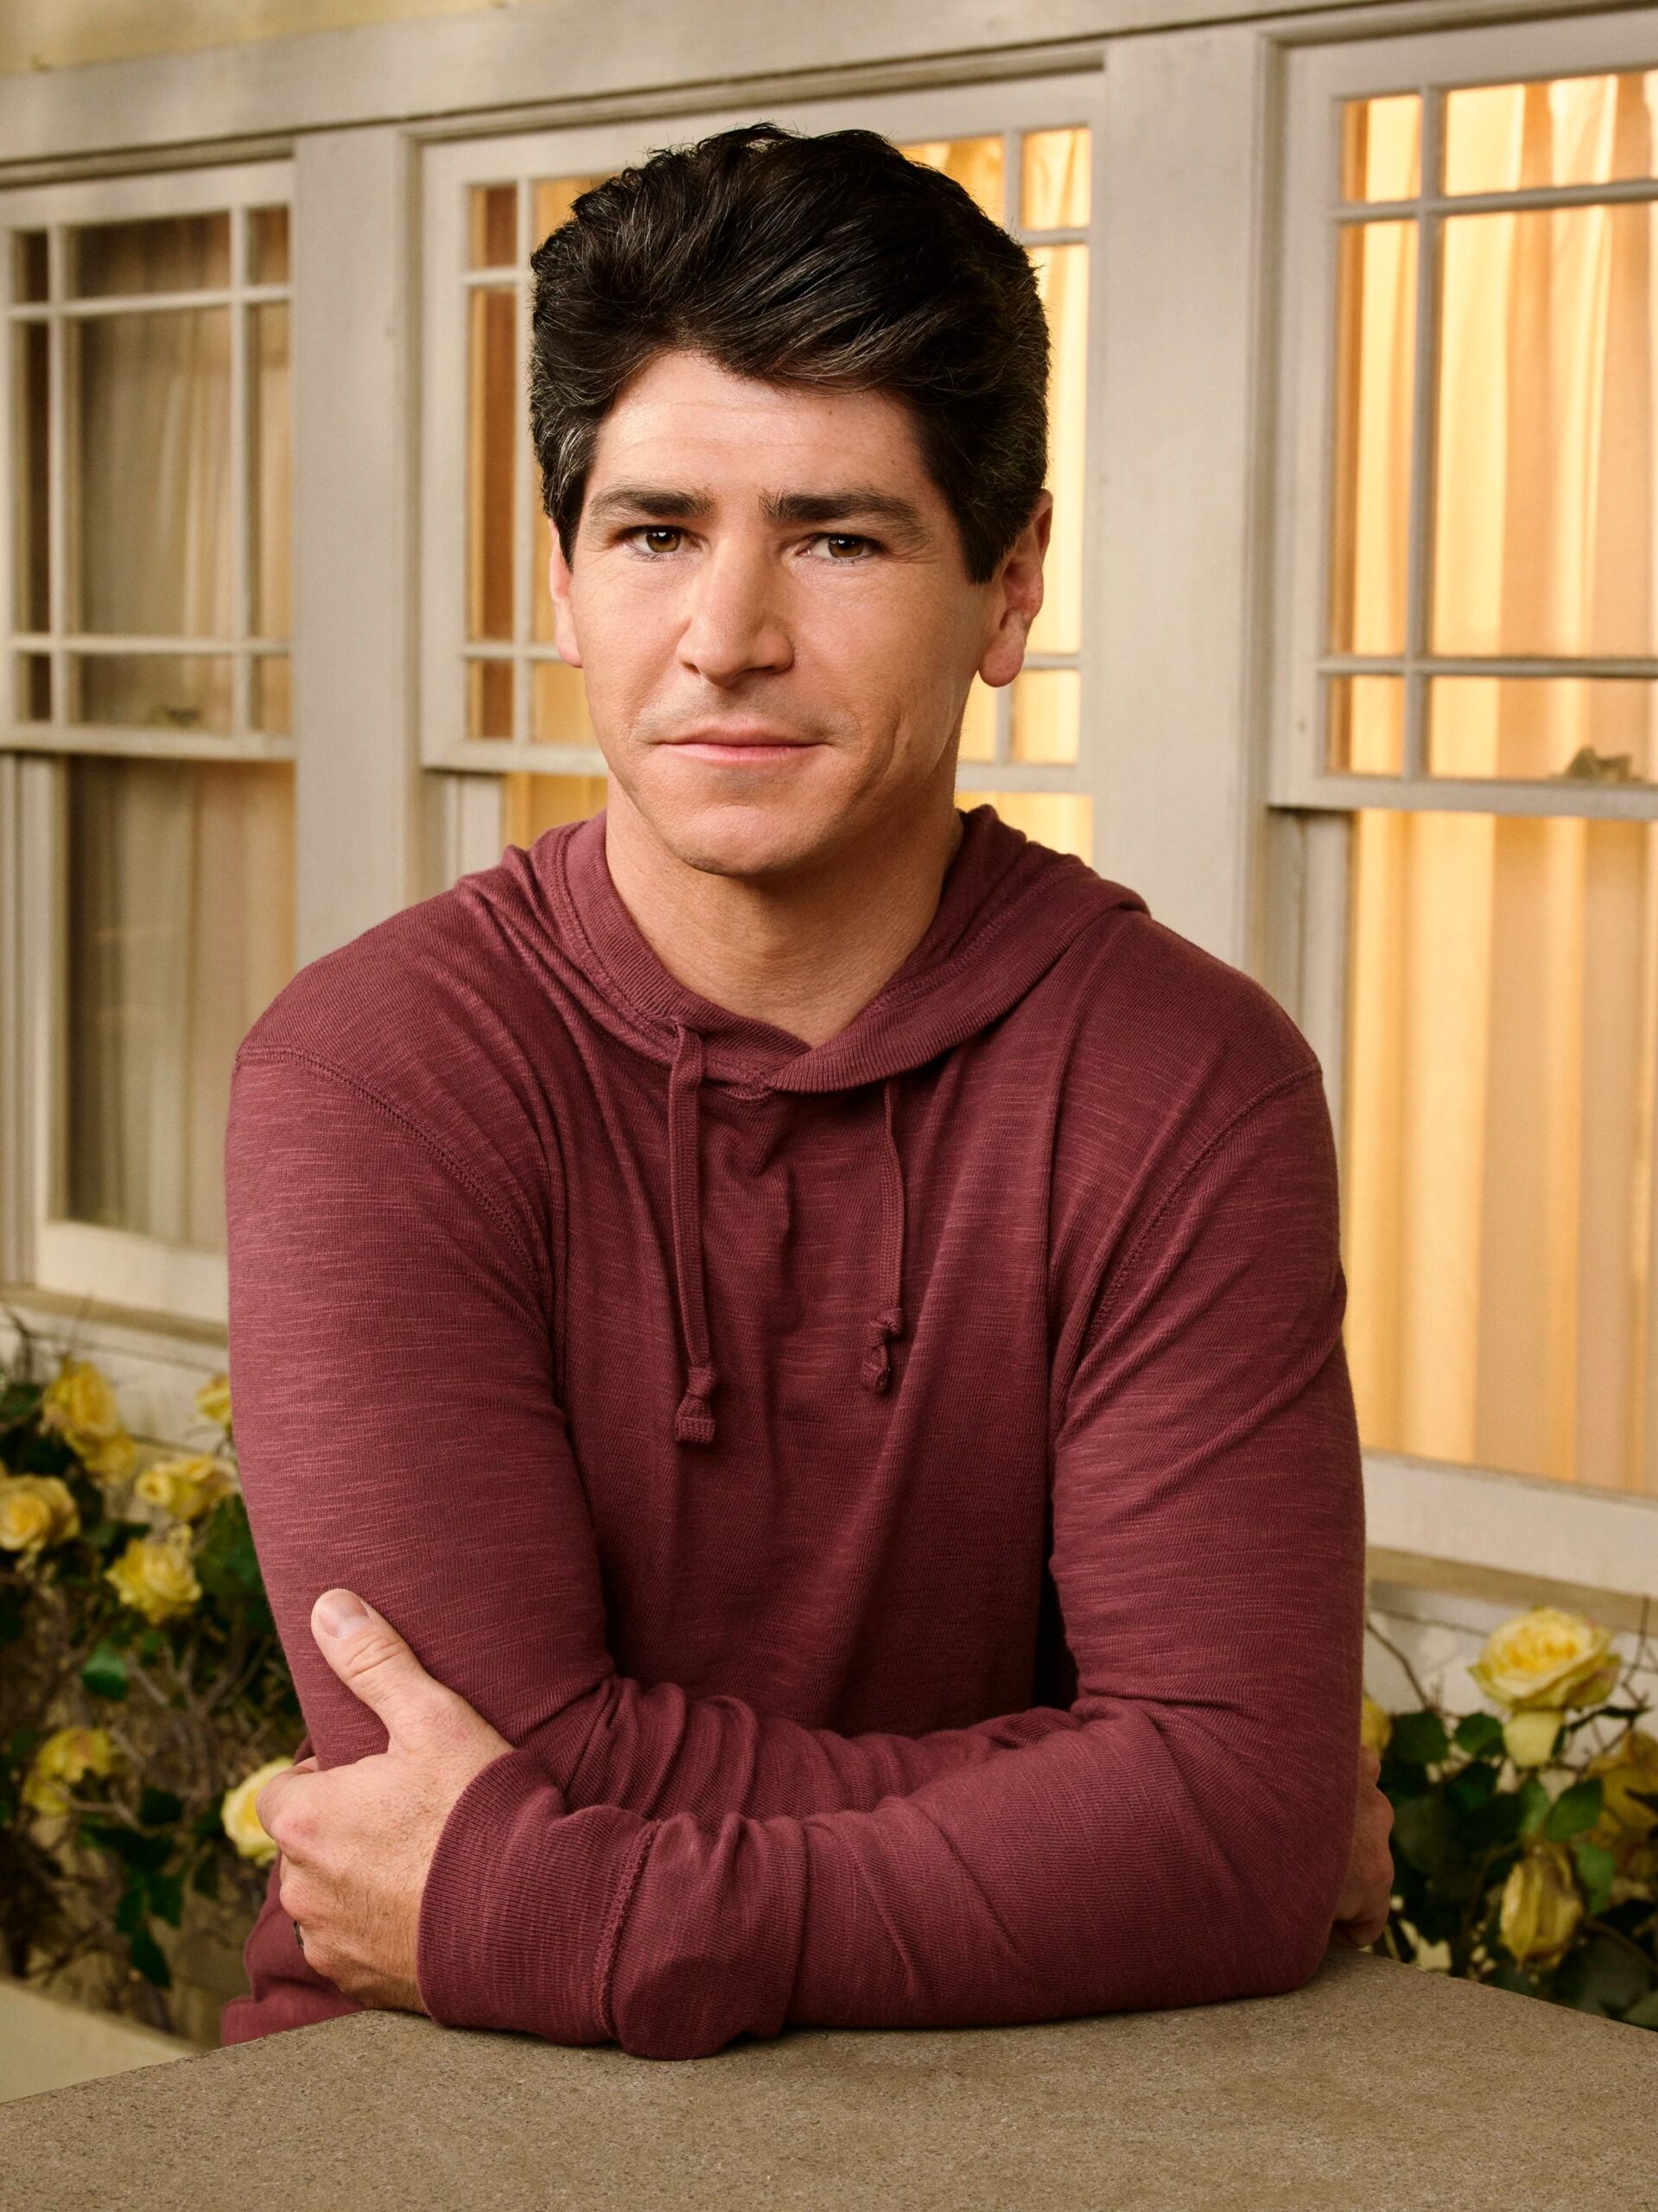 Is Michael Fishman [D.J Conner] Leaving The Conners